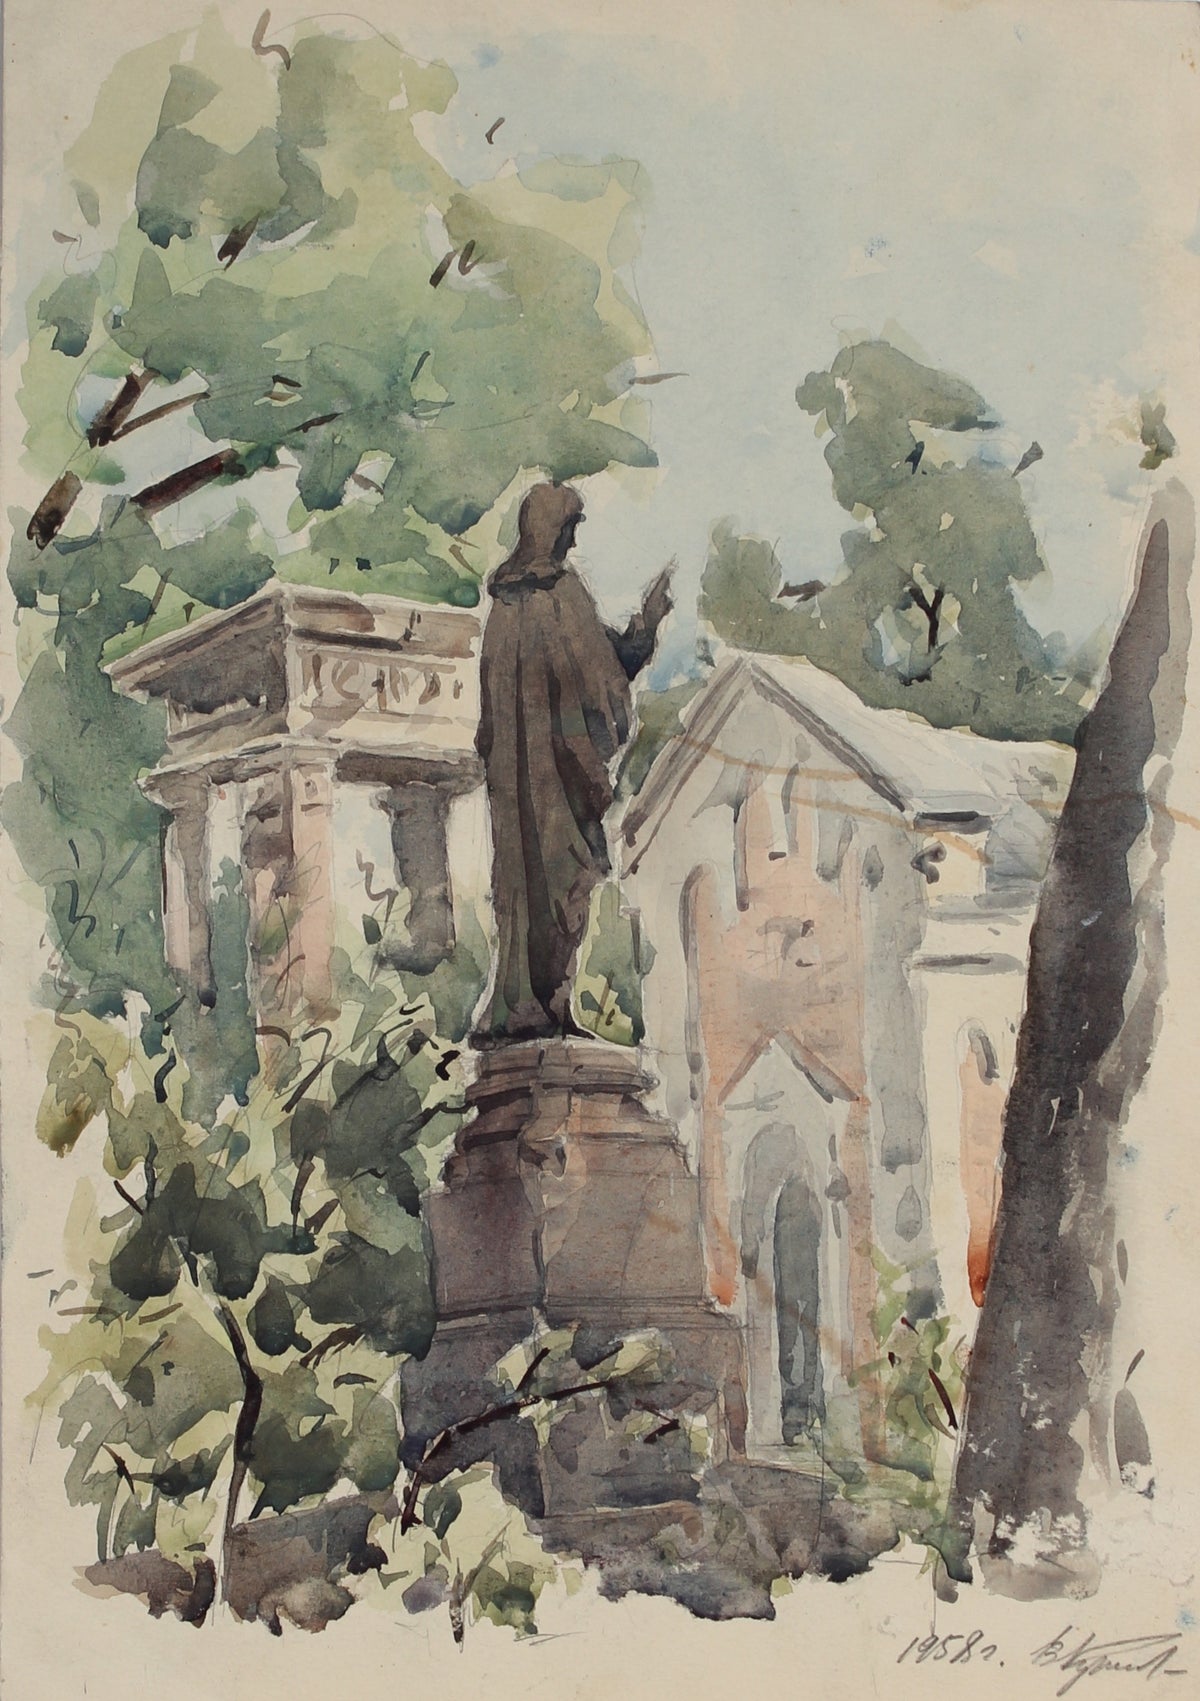 Statue in the Park&lt;br&gt;1958 Watercolor &amp; Graphite&lt;br&gt;Krizh&lt;br&gt;&lt;br&gt;#A3011